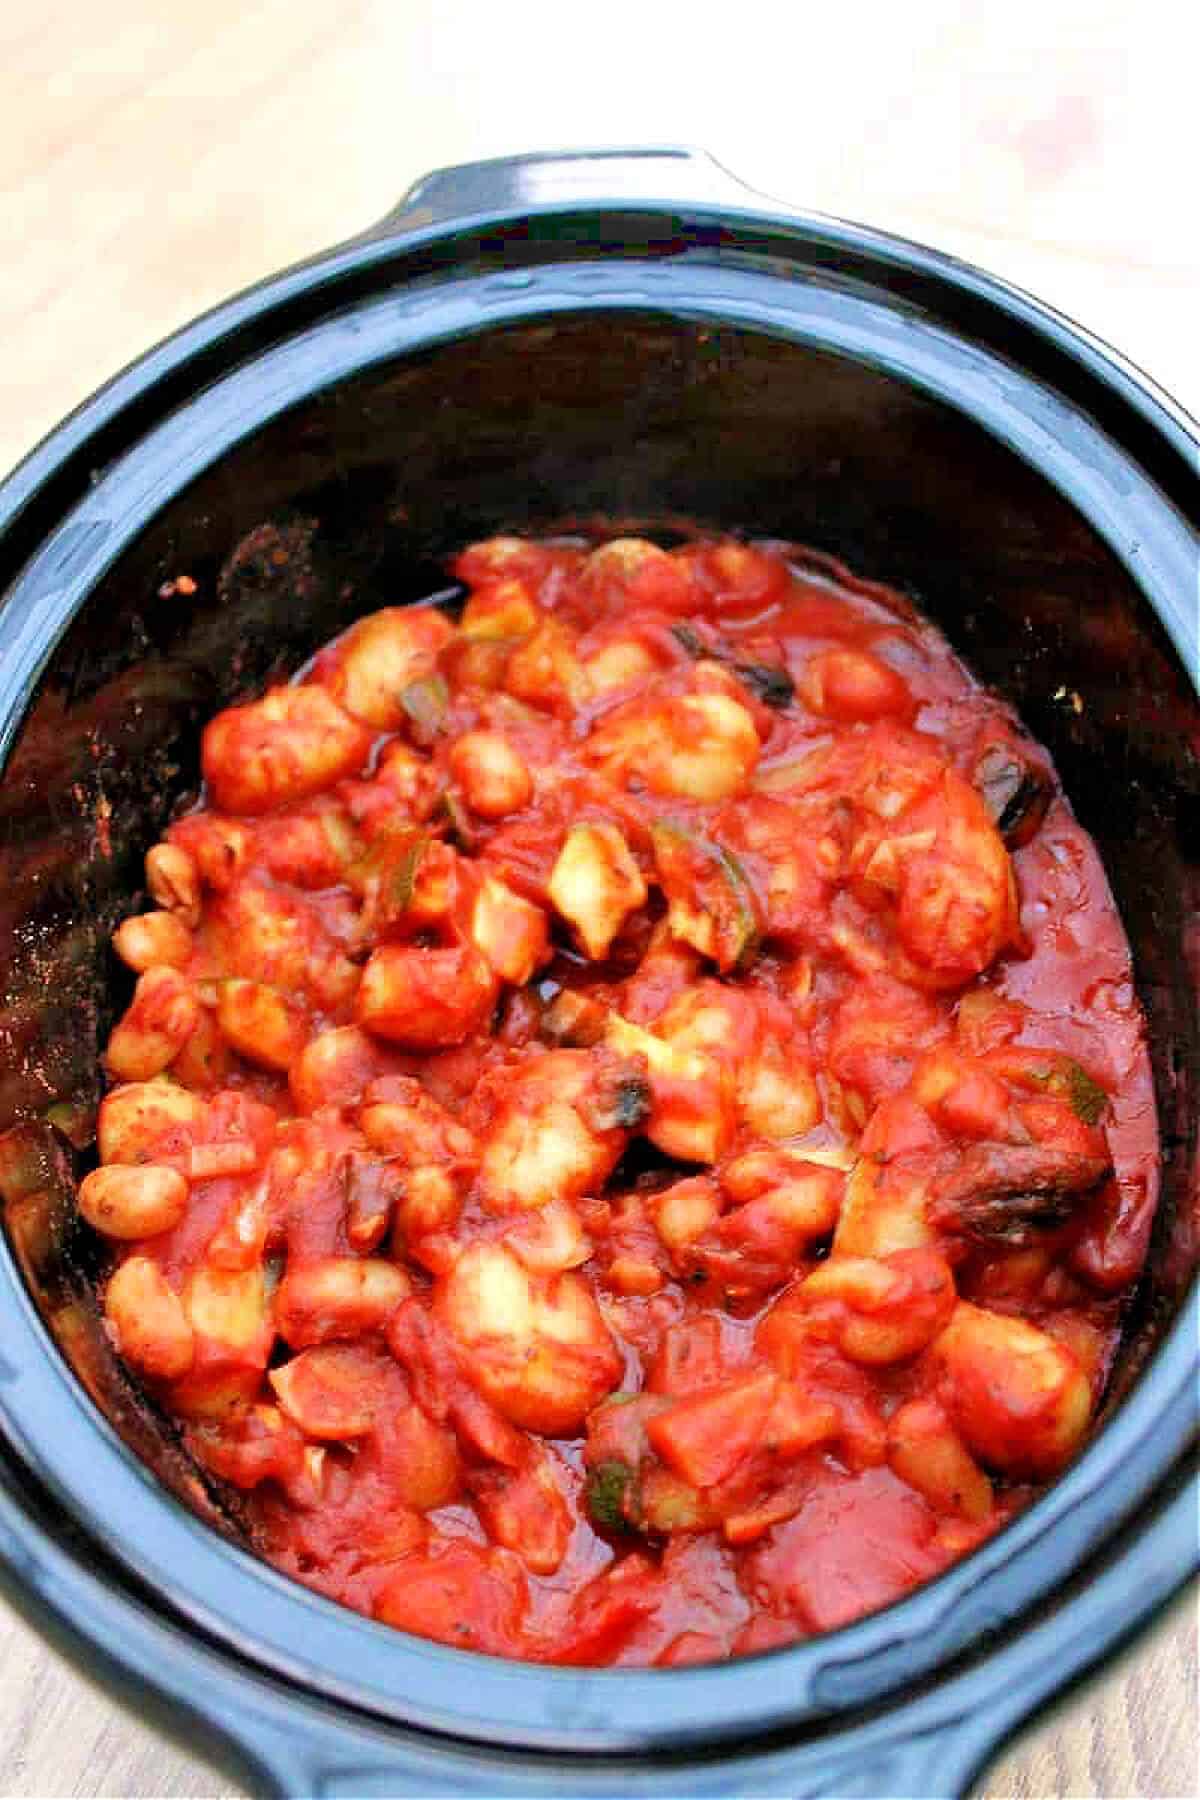 Gnocchi with beans and veggies in a tomato sauce in slow cooker pot.